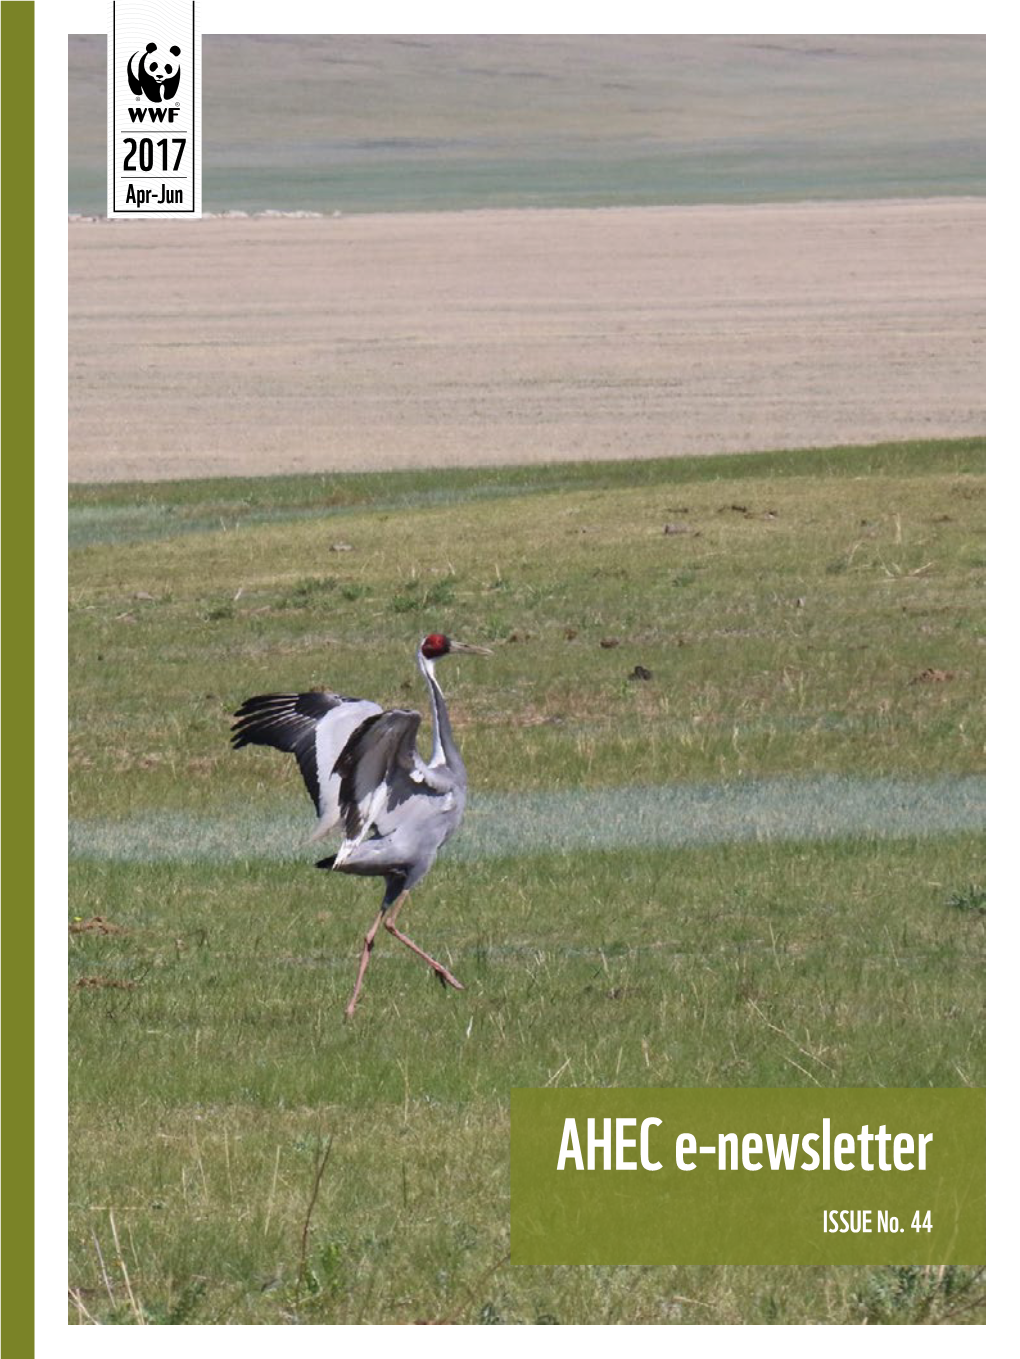 AHEC E-Newsletter ISSUE No